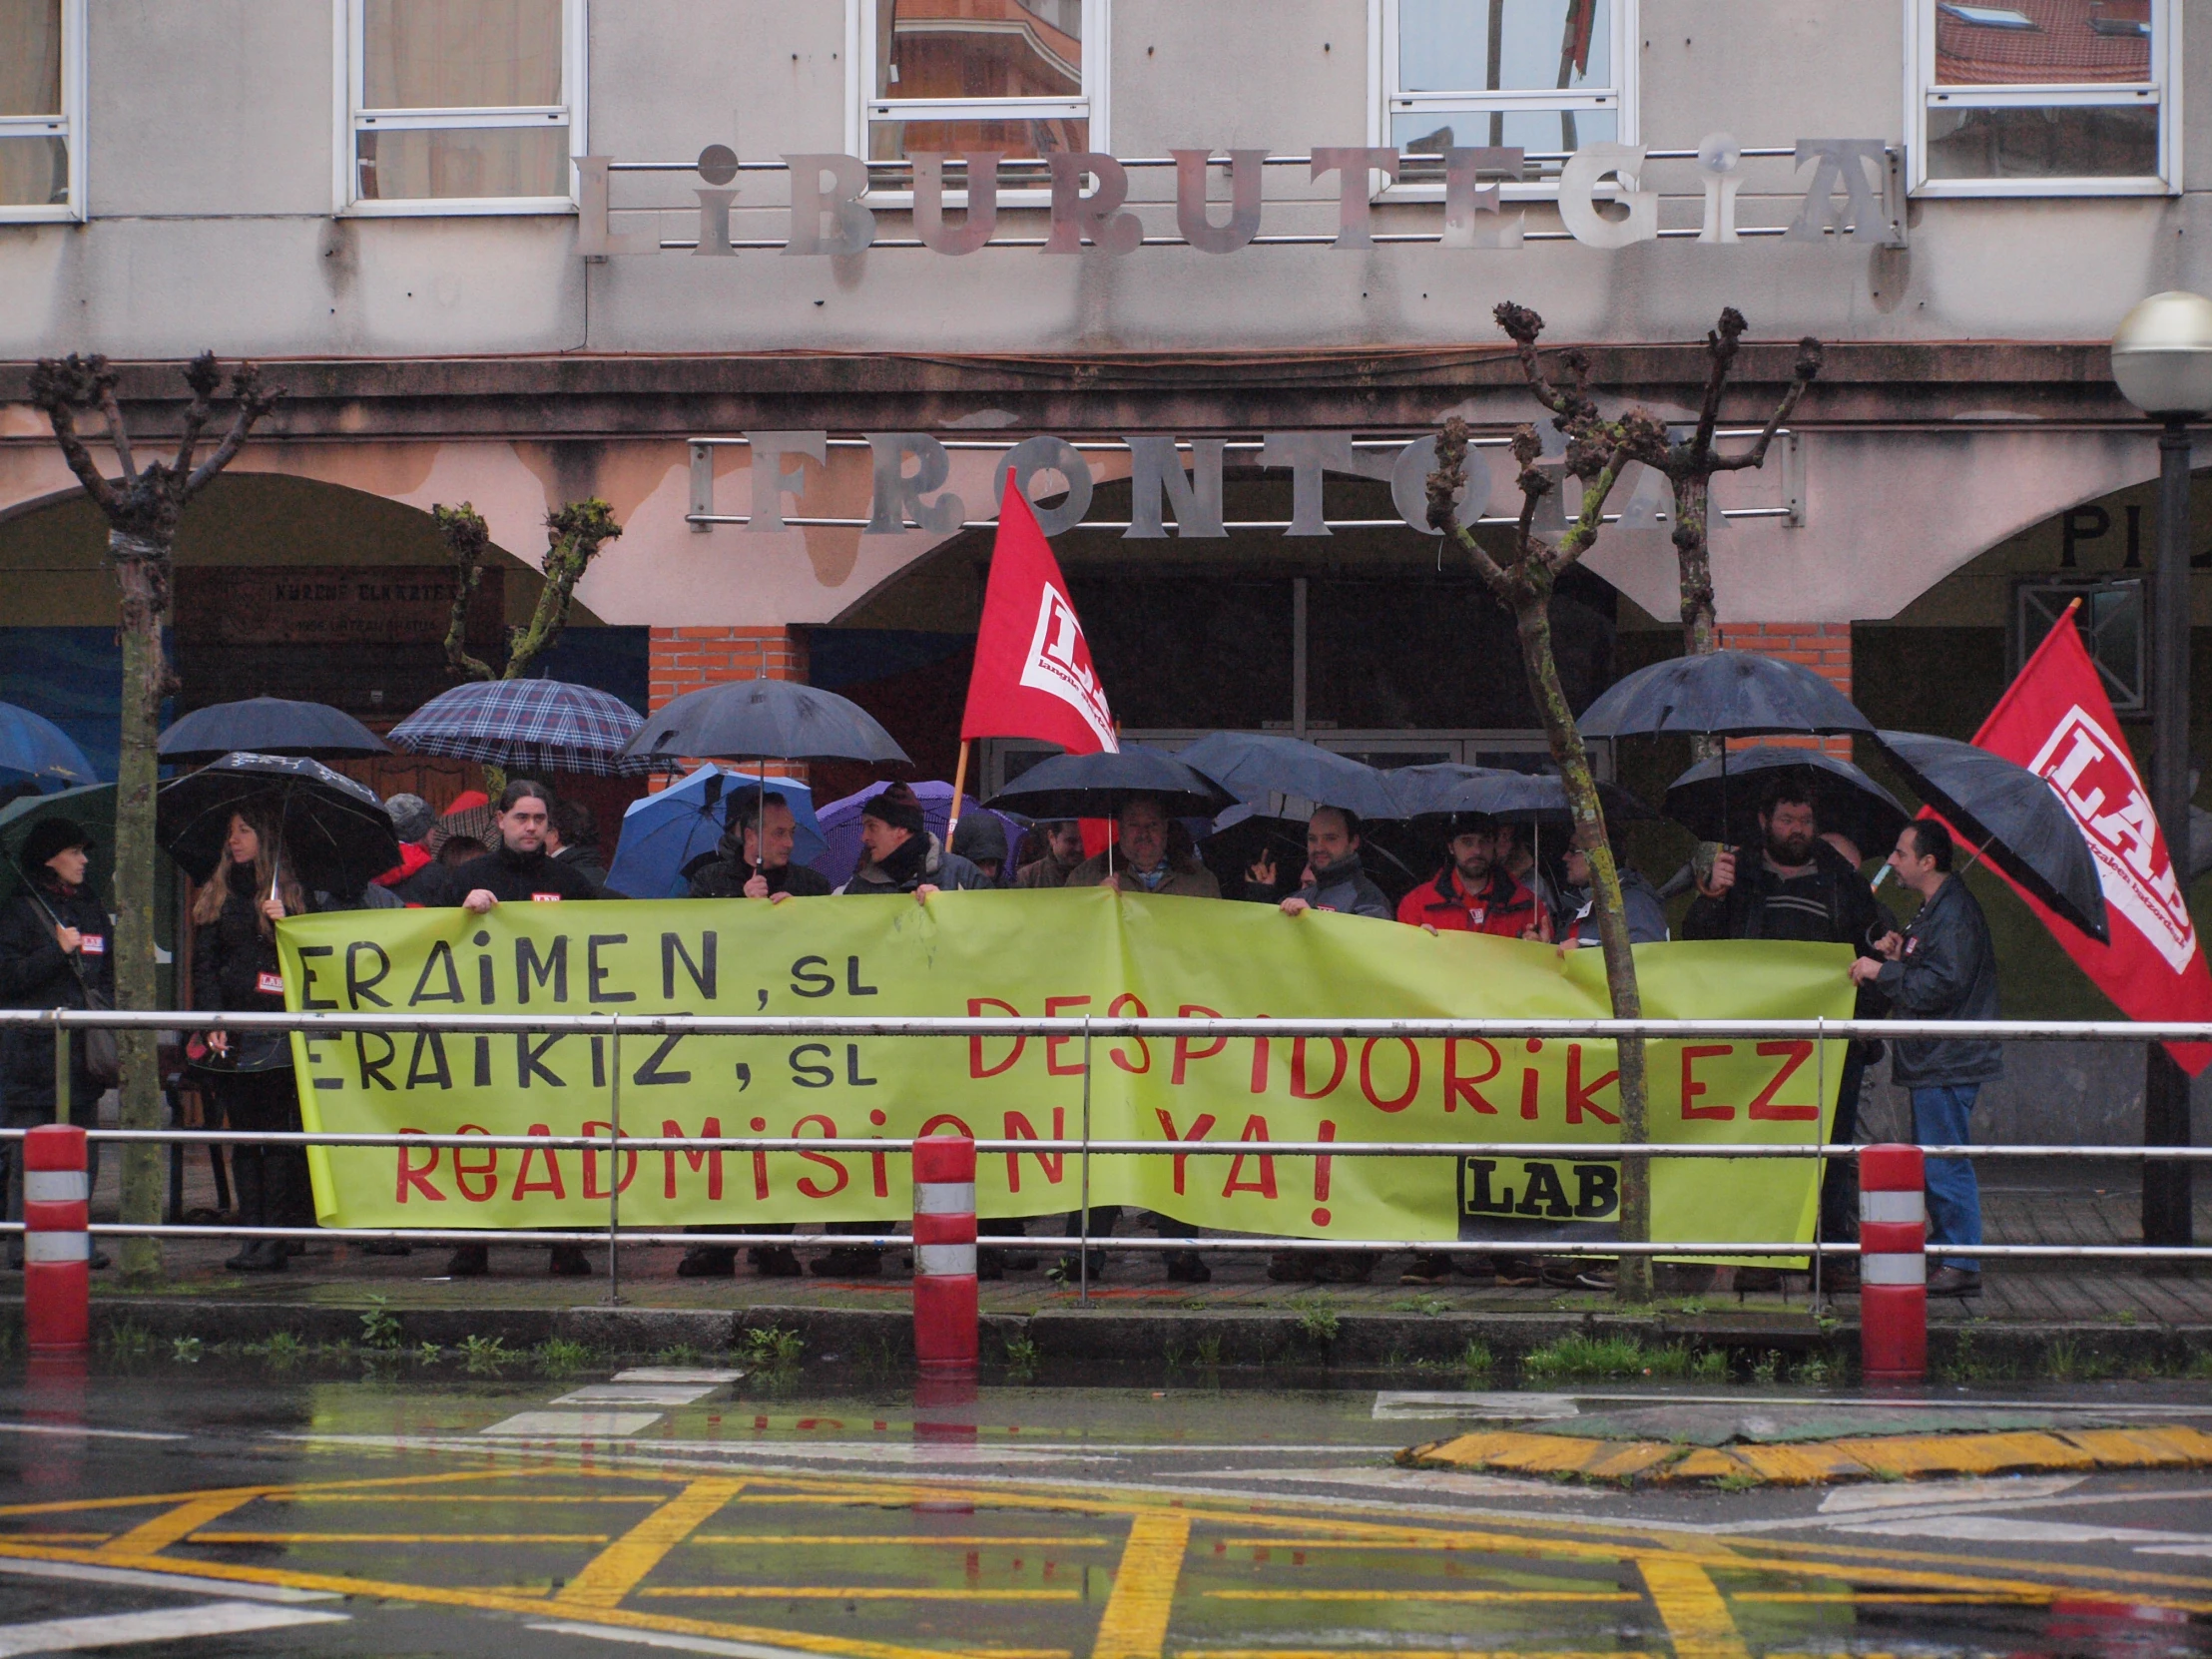 the people are holding a banner in the rain